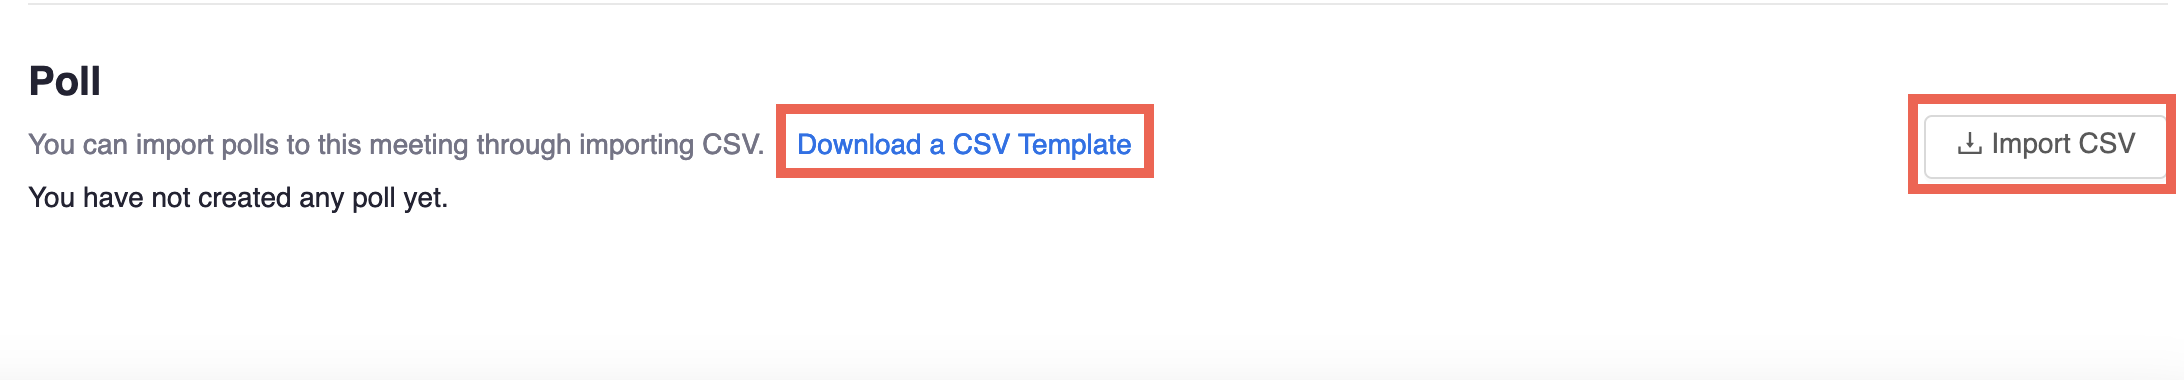 This image shows after you click on one of your meetings, you have to go to Poll and clickc on Import CSV or Download a CSV Template.